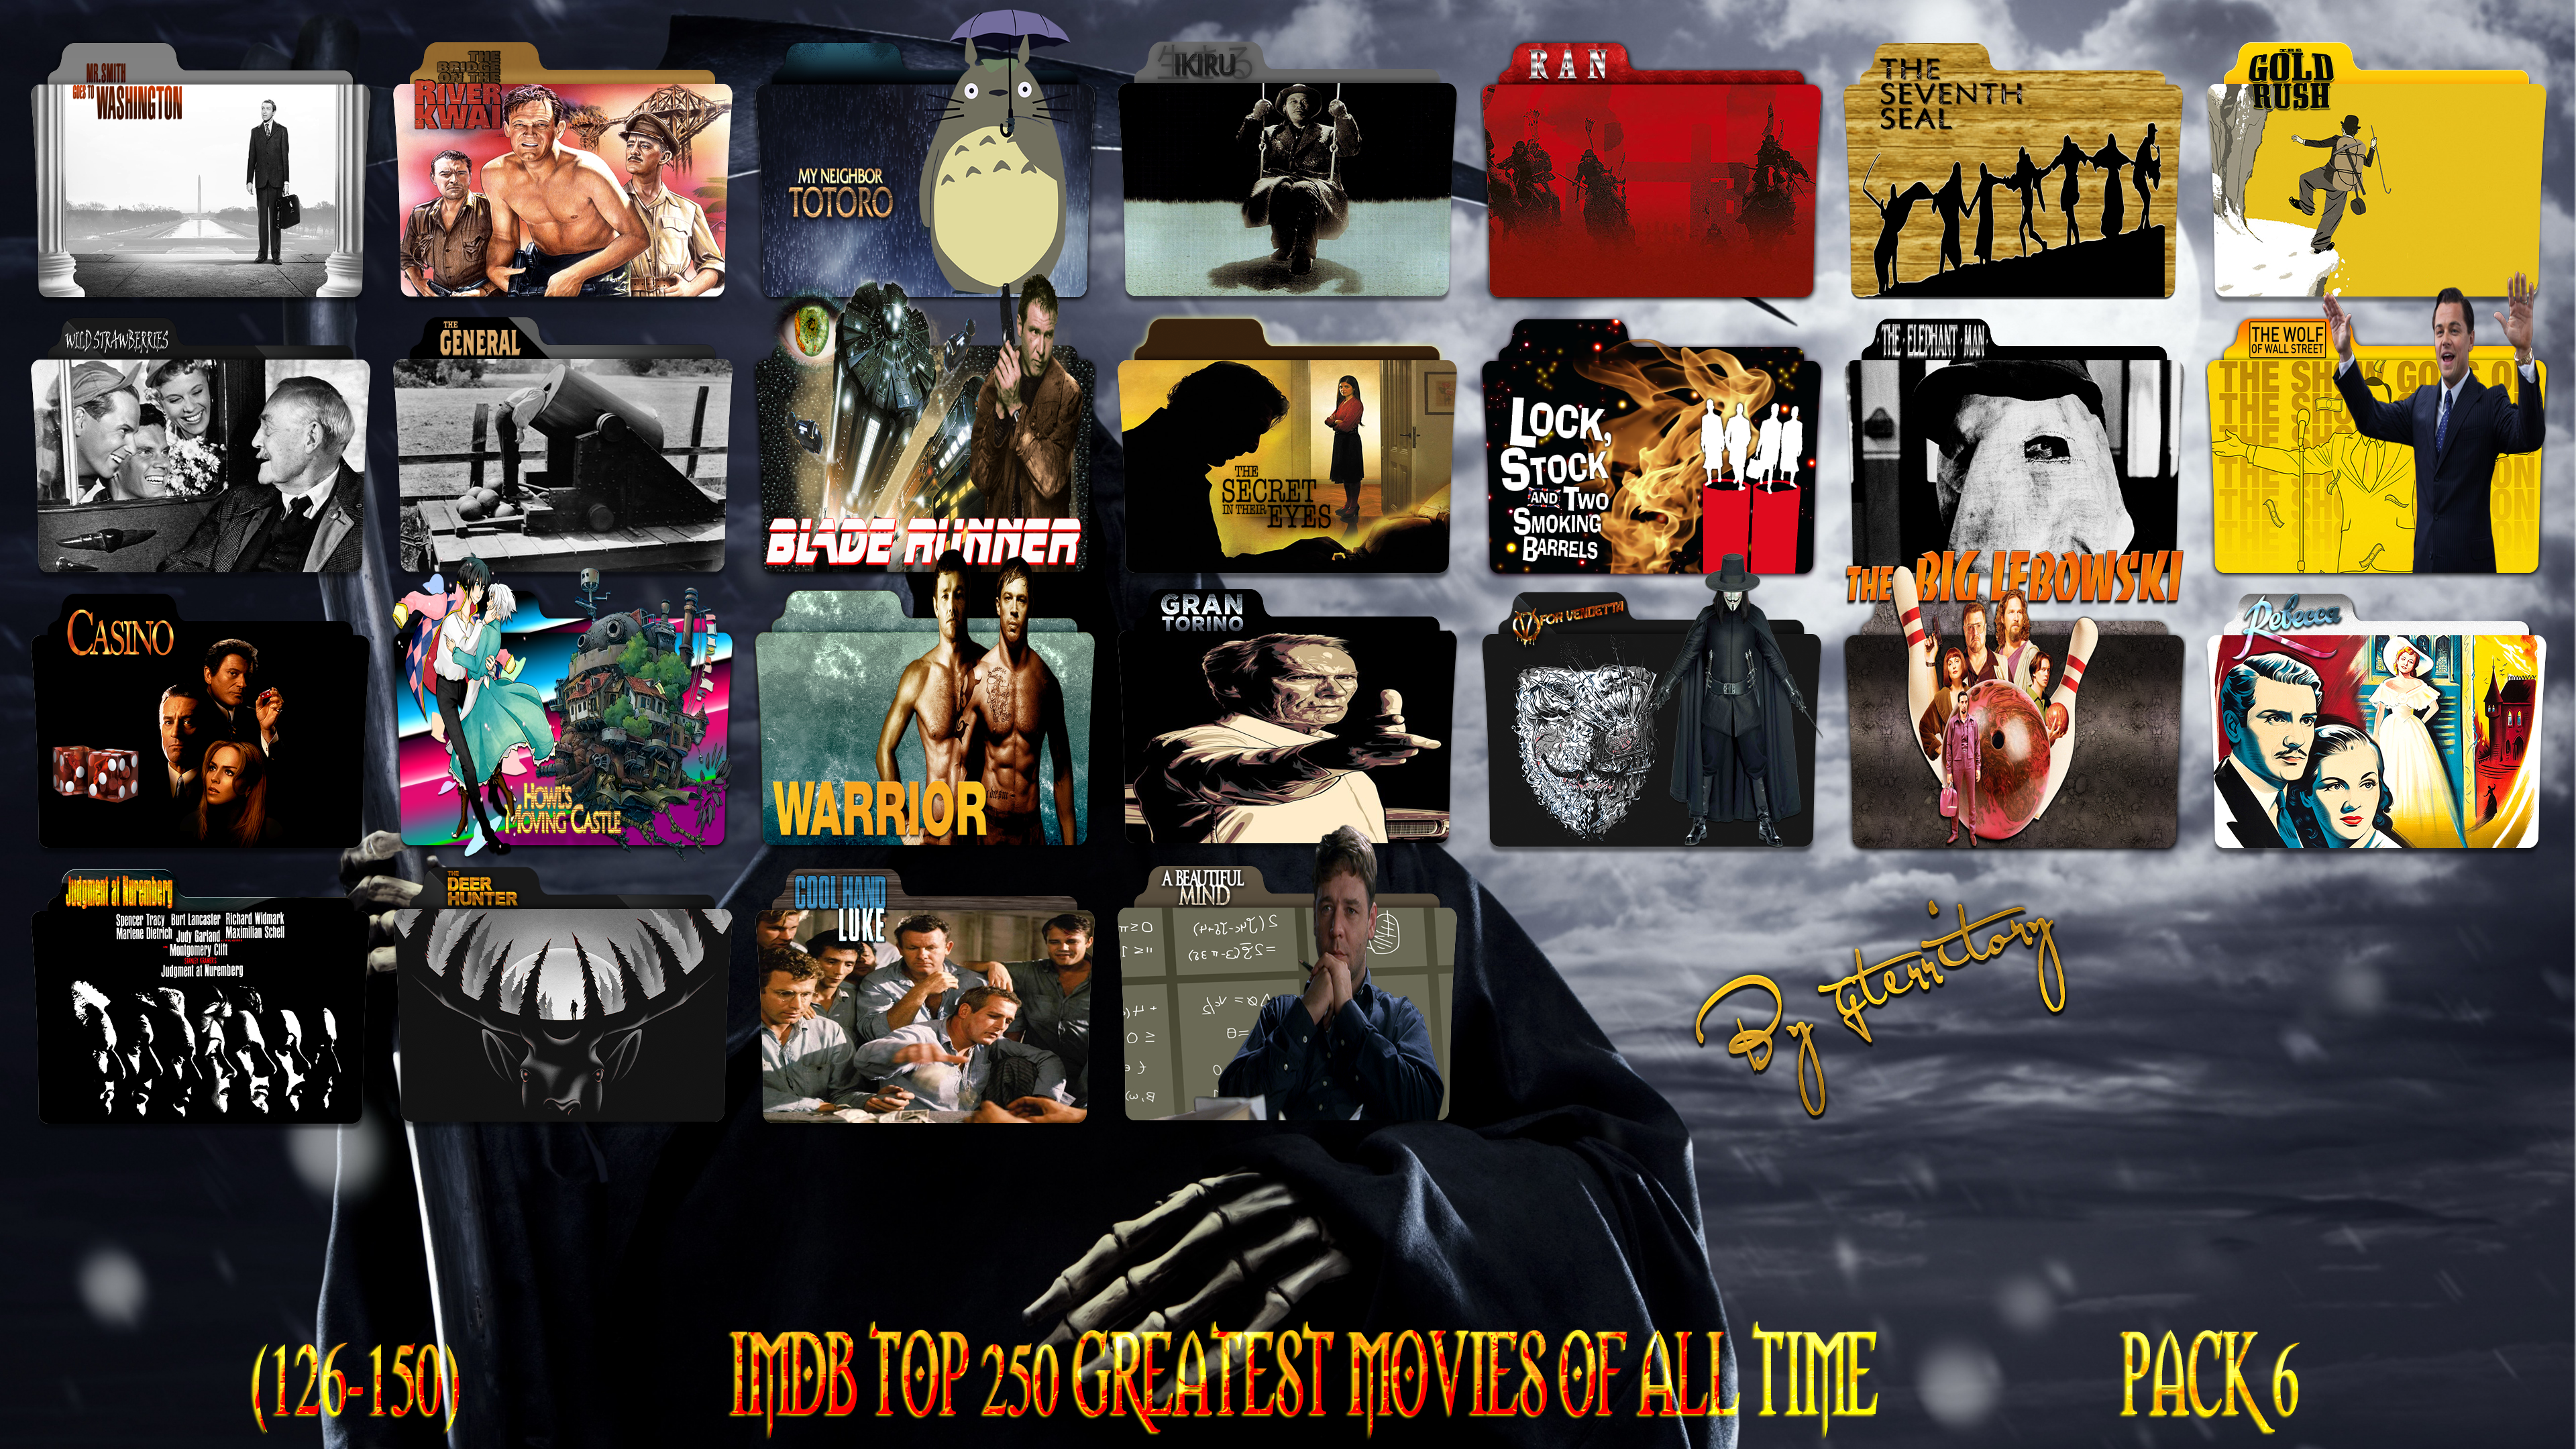 Ferie eksotisk Forebyggelse IMDB Top 250 Greatest Movies Of All Time-Pack 6 by gterritory on DeviantArt